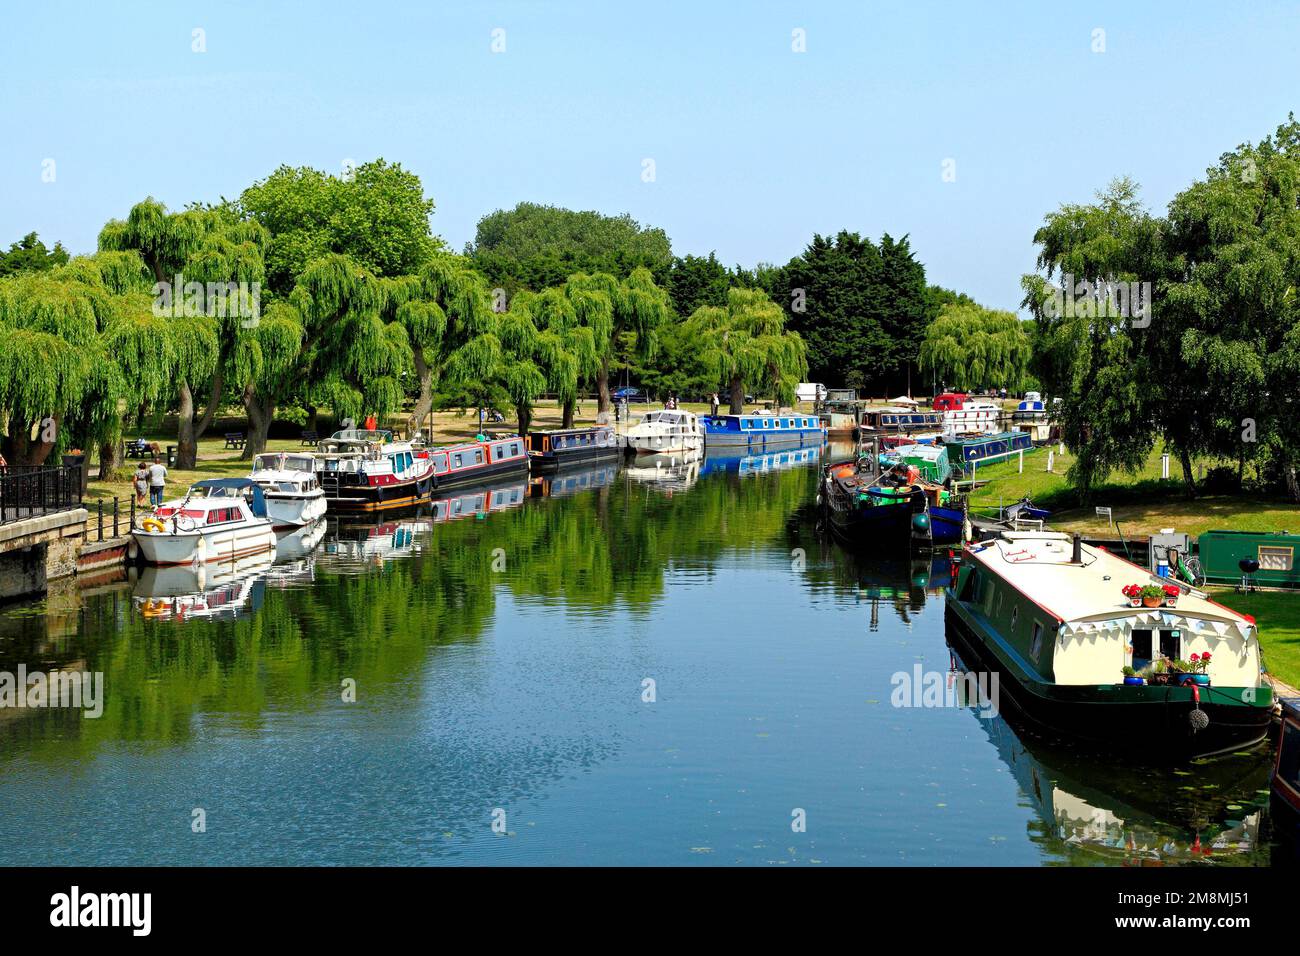 Ely, River Ouse, barges and boats, Cambridgeshire, England, UK Stock Photo